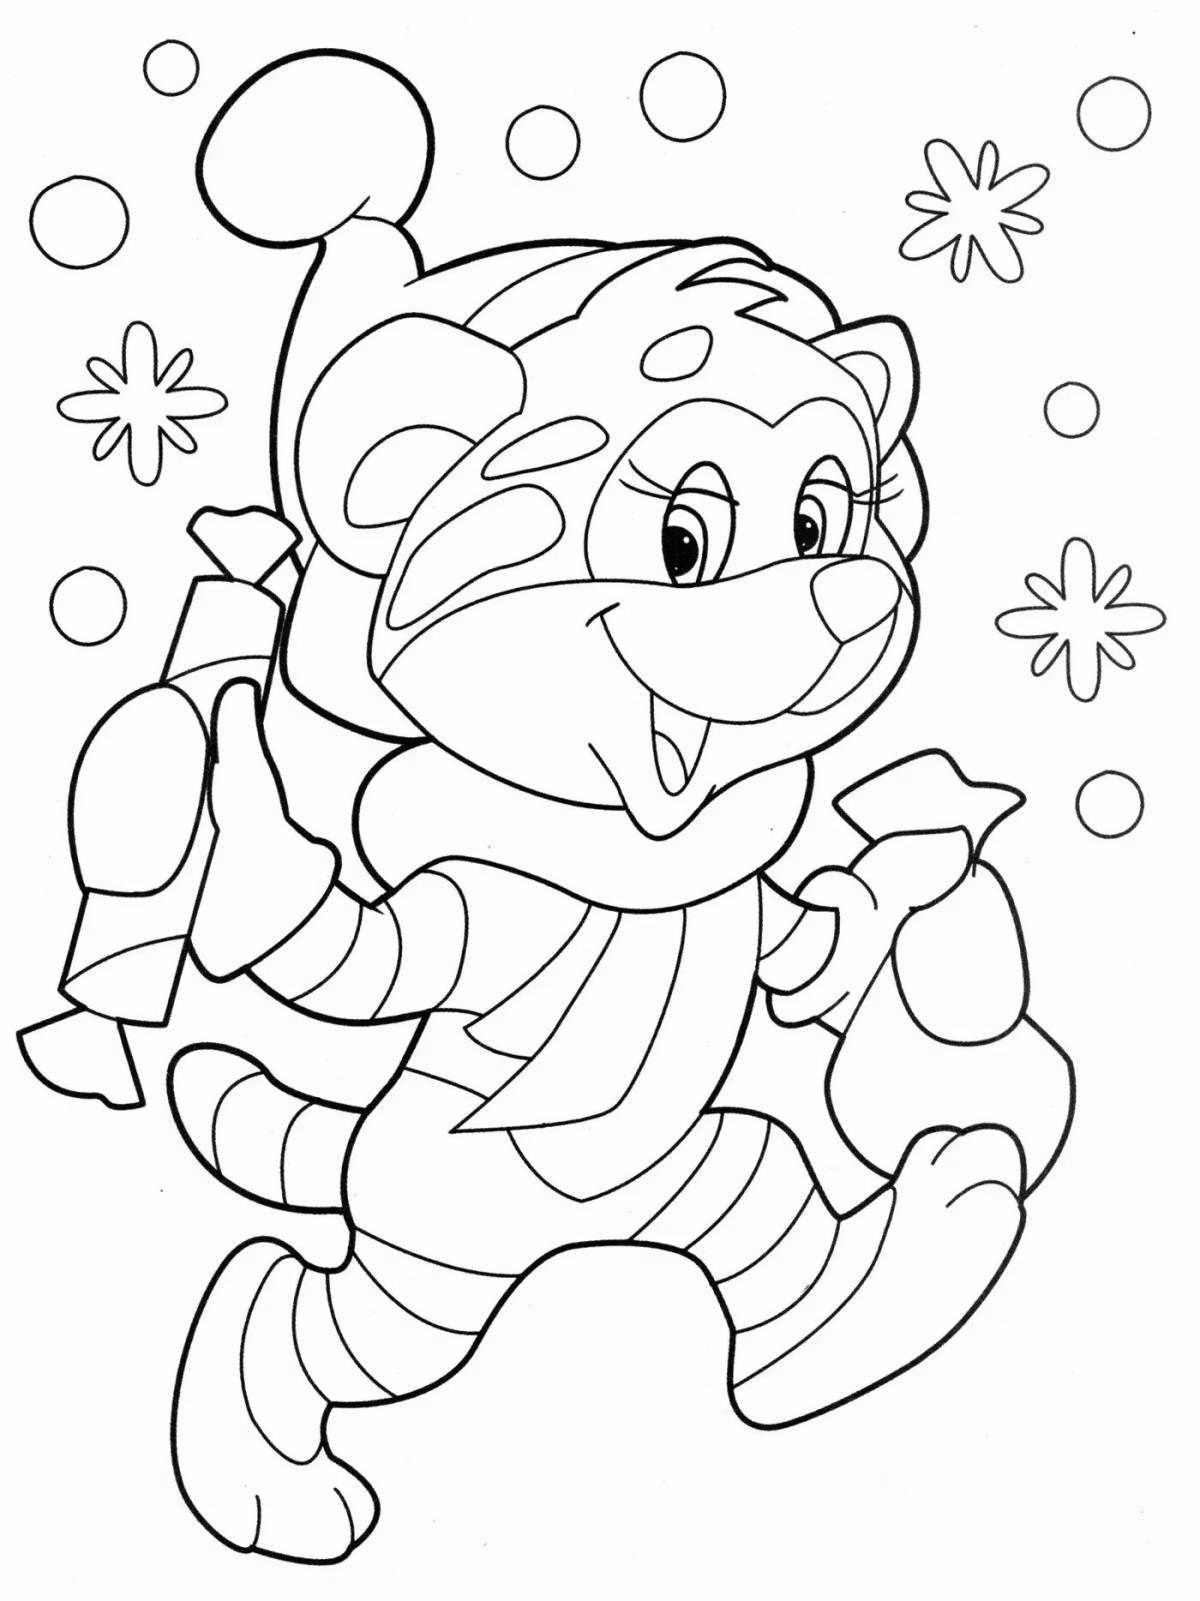 Attractive new coloring pages